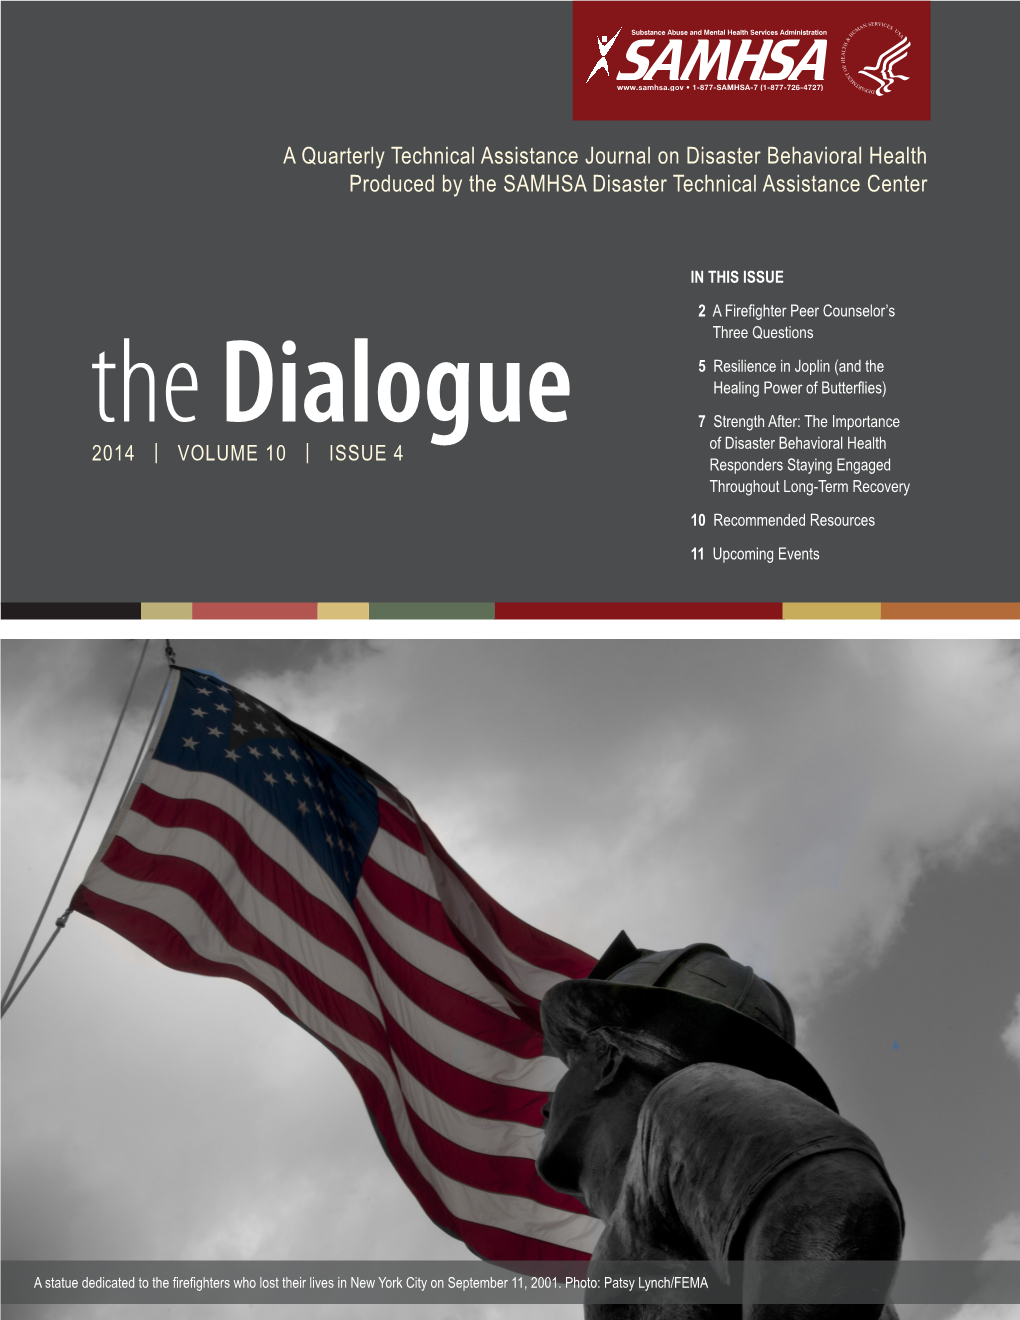 The Dialogue: Volume 10, Issue 4